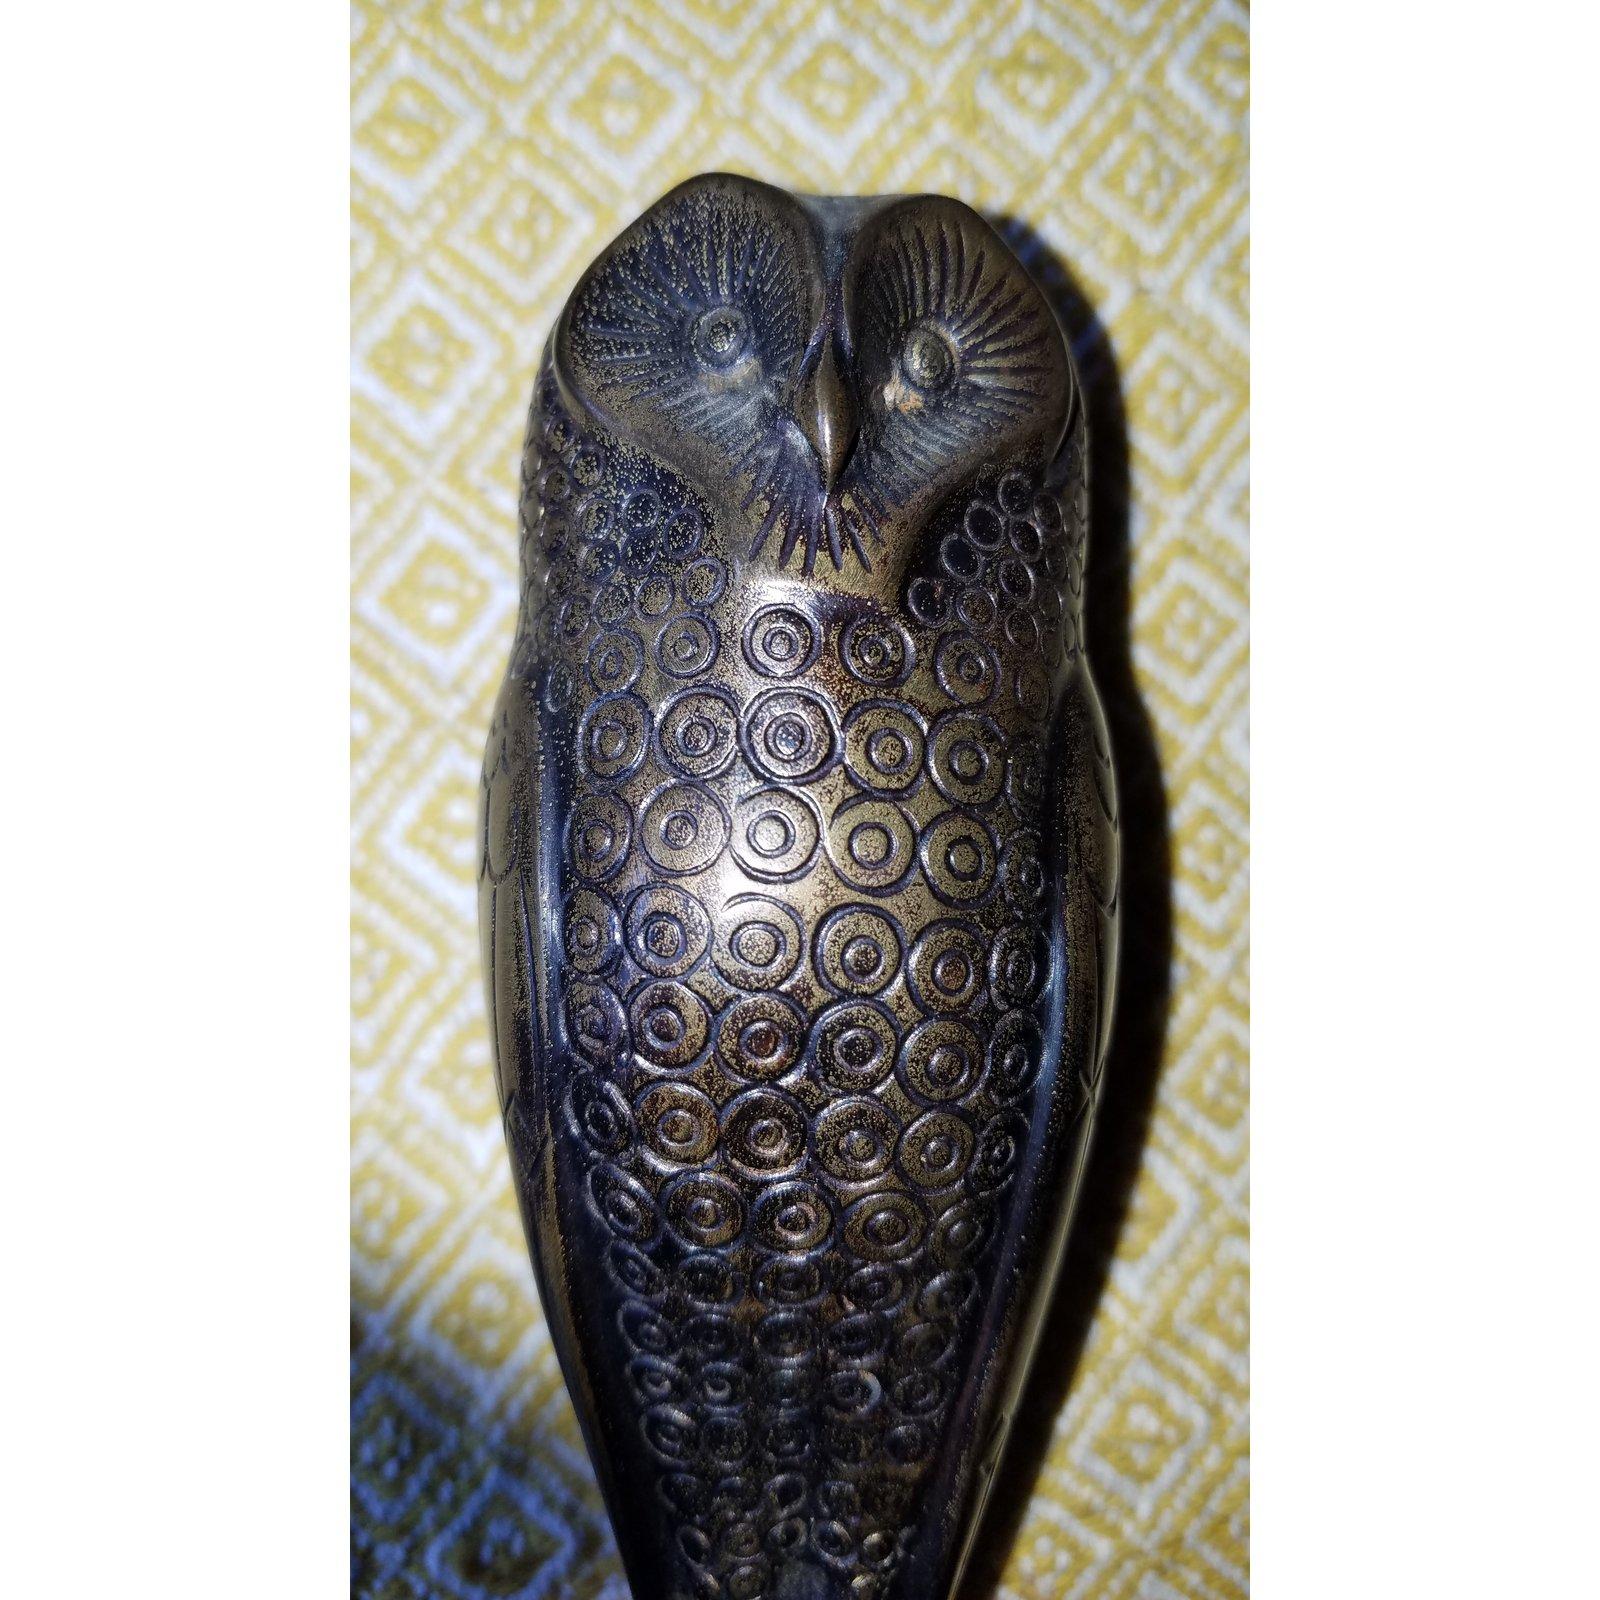 Charming signed bronze of an owl artist signed Hans Muller. The bronze owl standing on stacked books with parcel gilt accents. Hans Müller (1873-1937) is well known for his Vienna Bronzes....